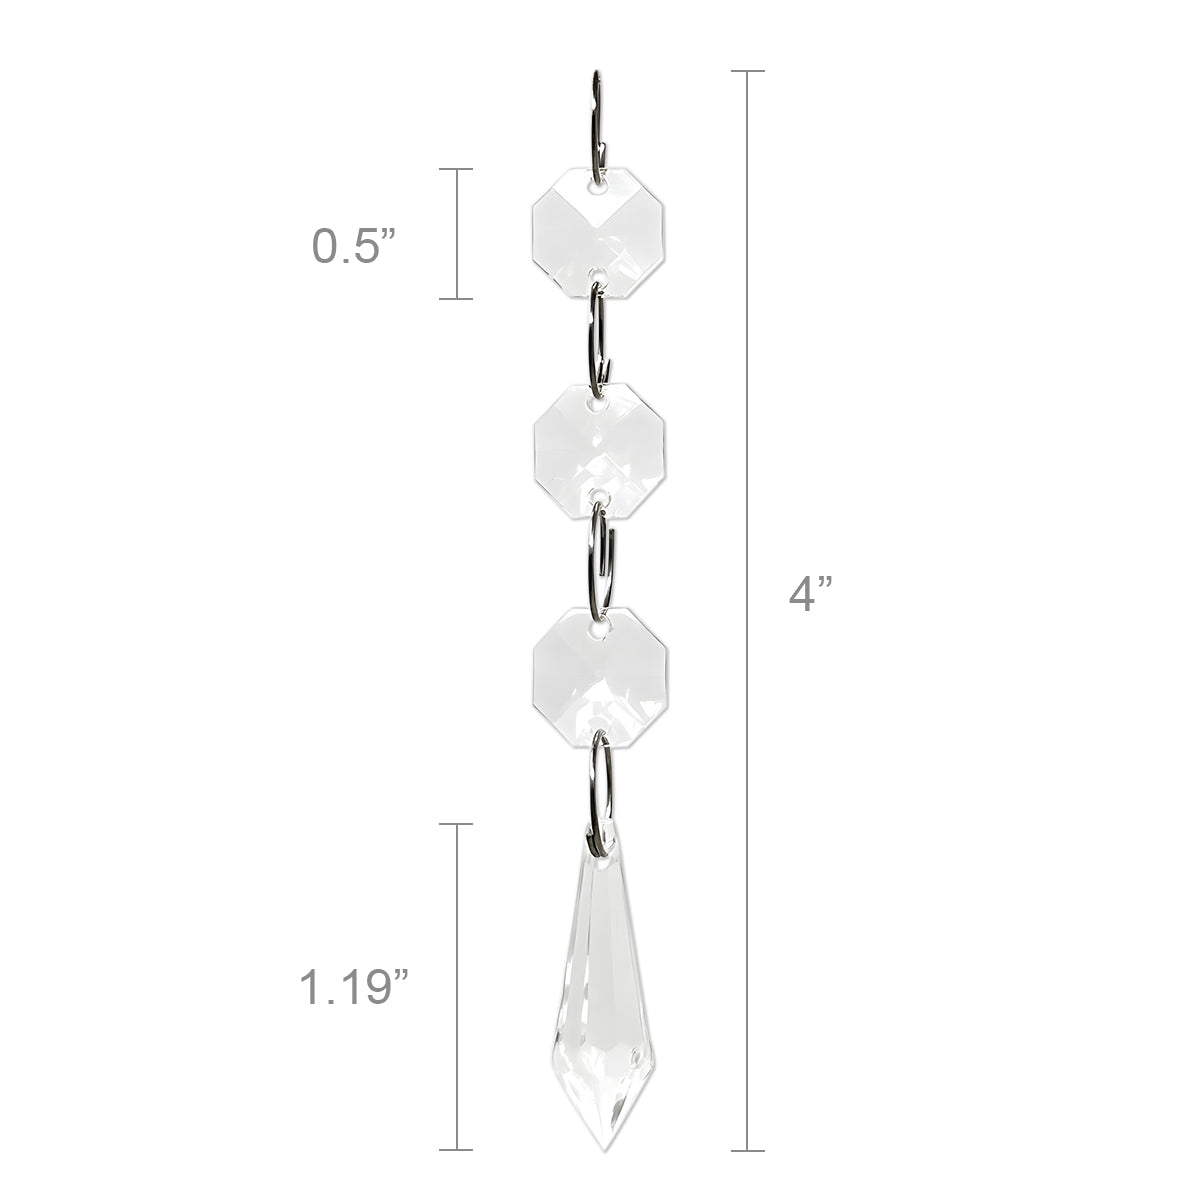 Wrapables Acrylic Hanging Crystal Bead Strands for Chandeliers, Garlands, Wedding Decorations, Christmas Tree Ornaments (20pcs)